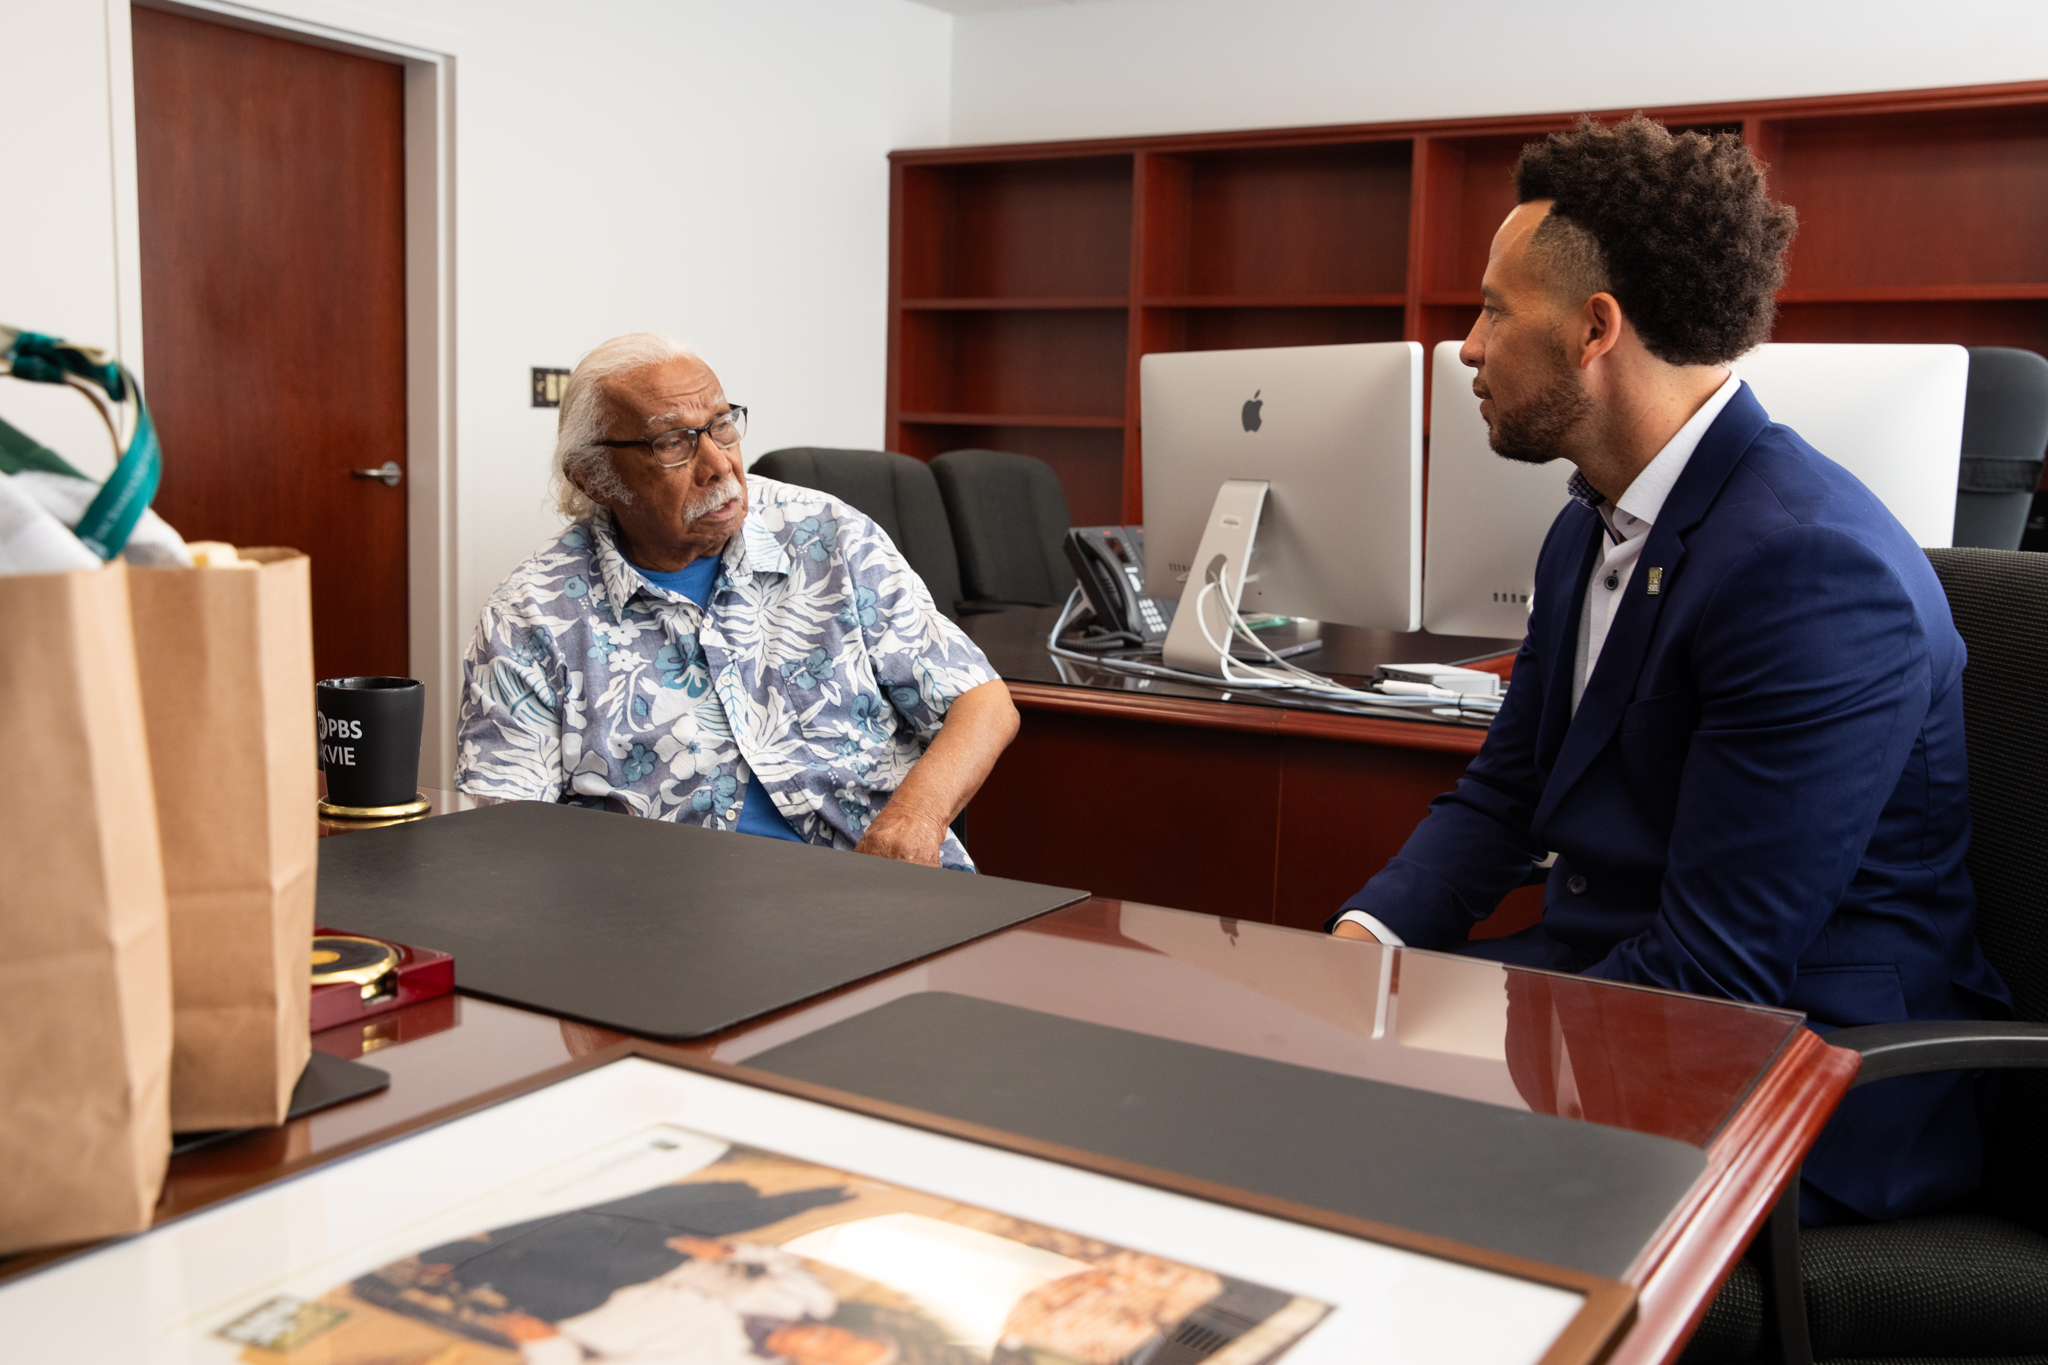 A 96-year-old alumnus visits Sac State's new president in his office.